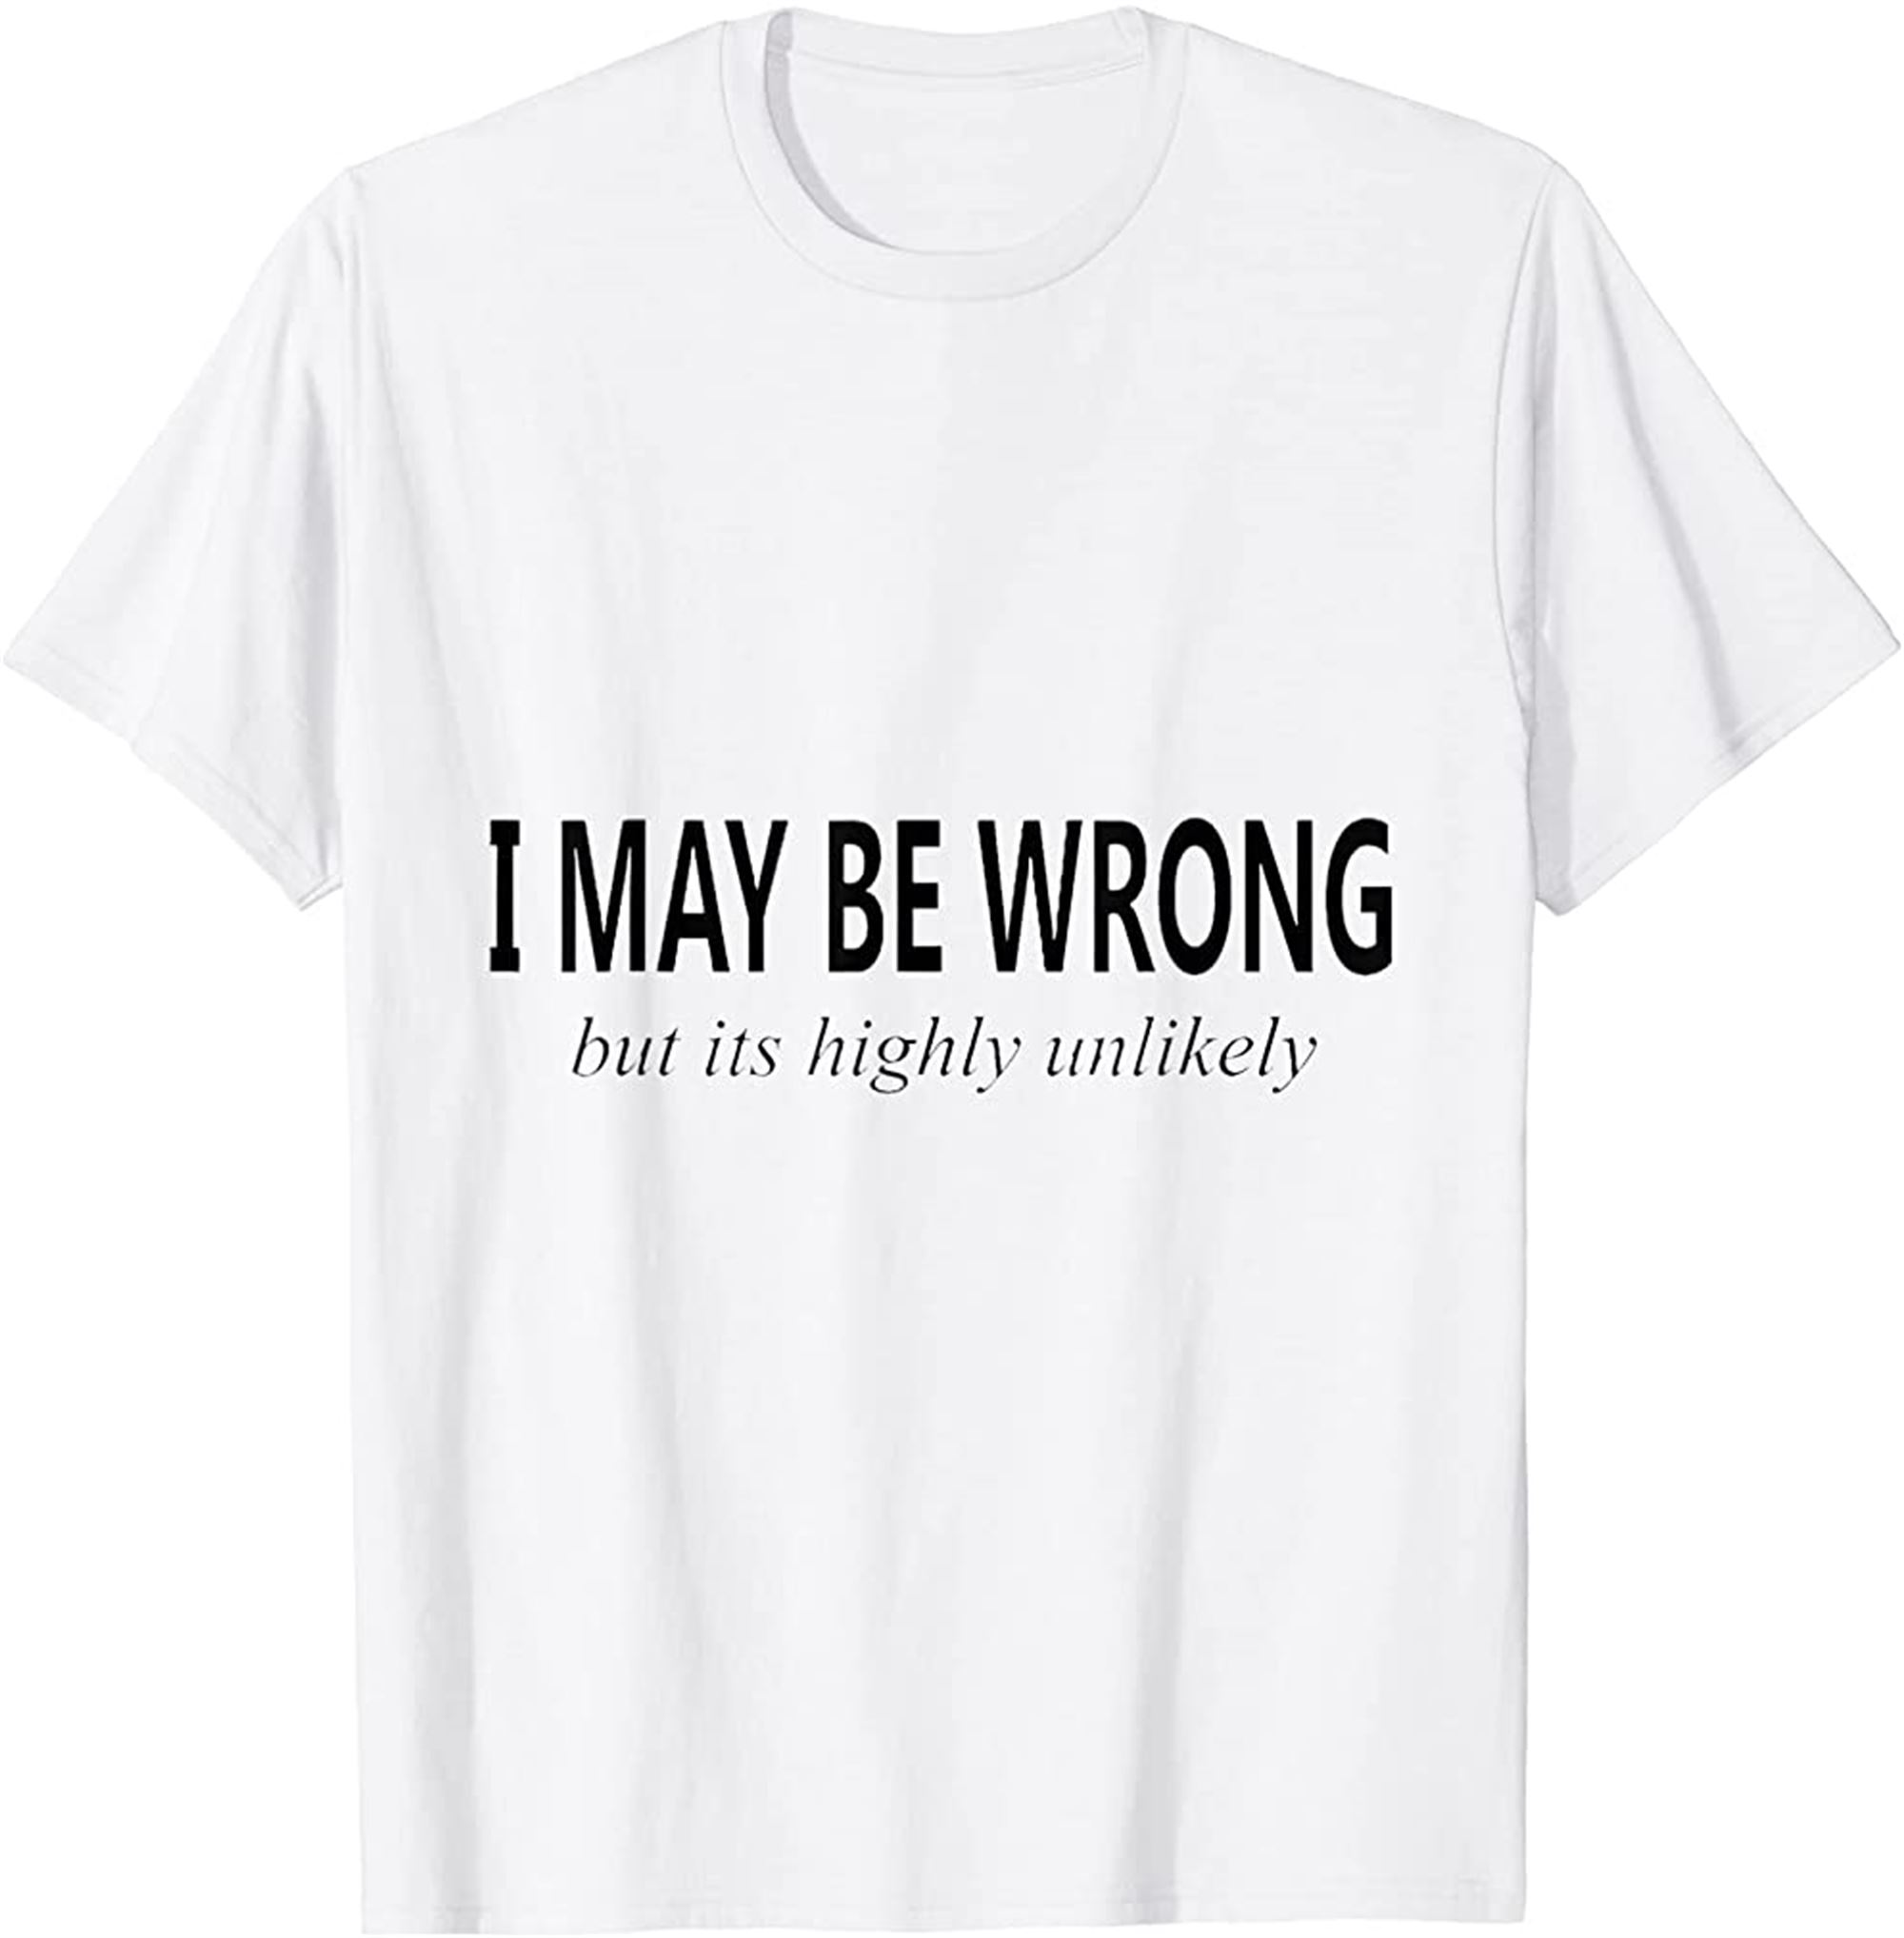 I May Be Wrong But Its Highly Unlikely Funny T-shirt Size Up To 5xl